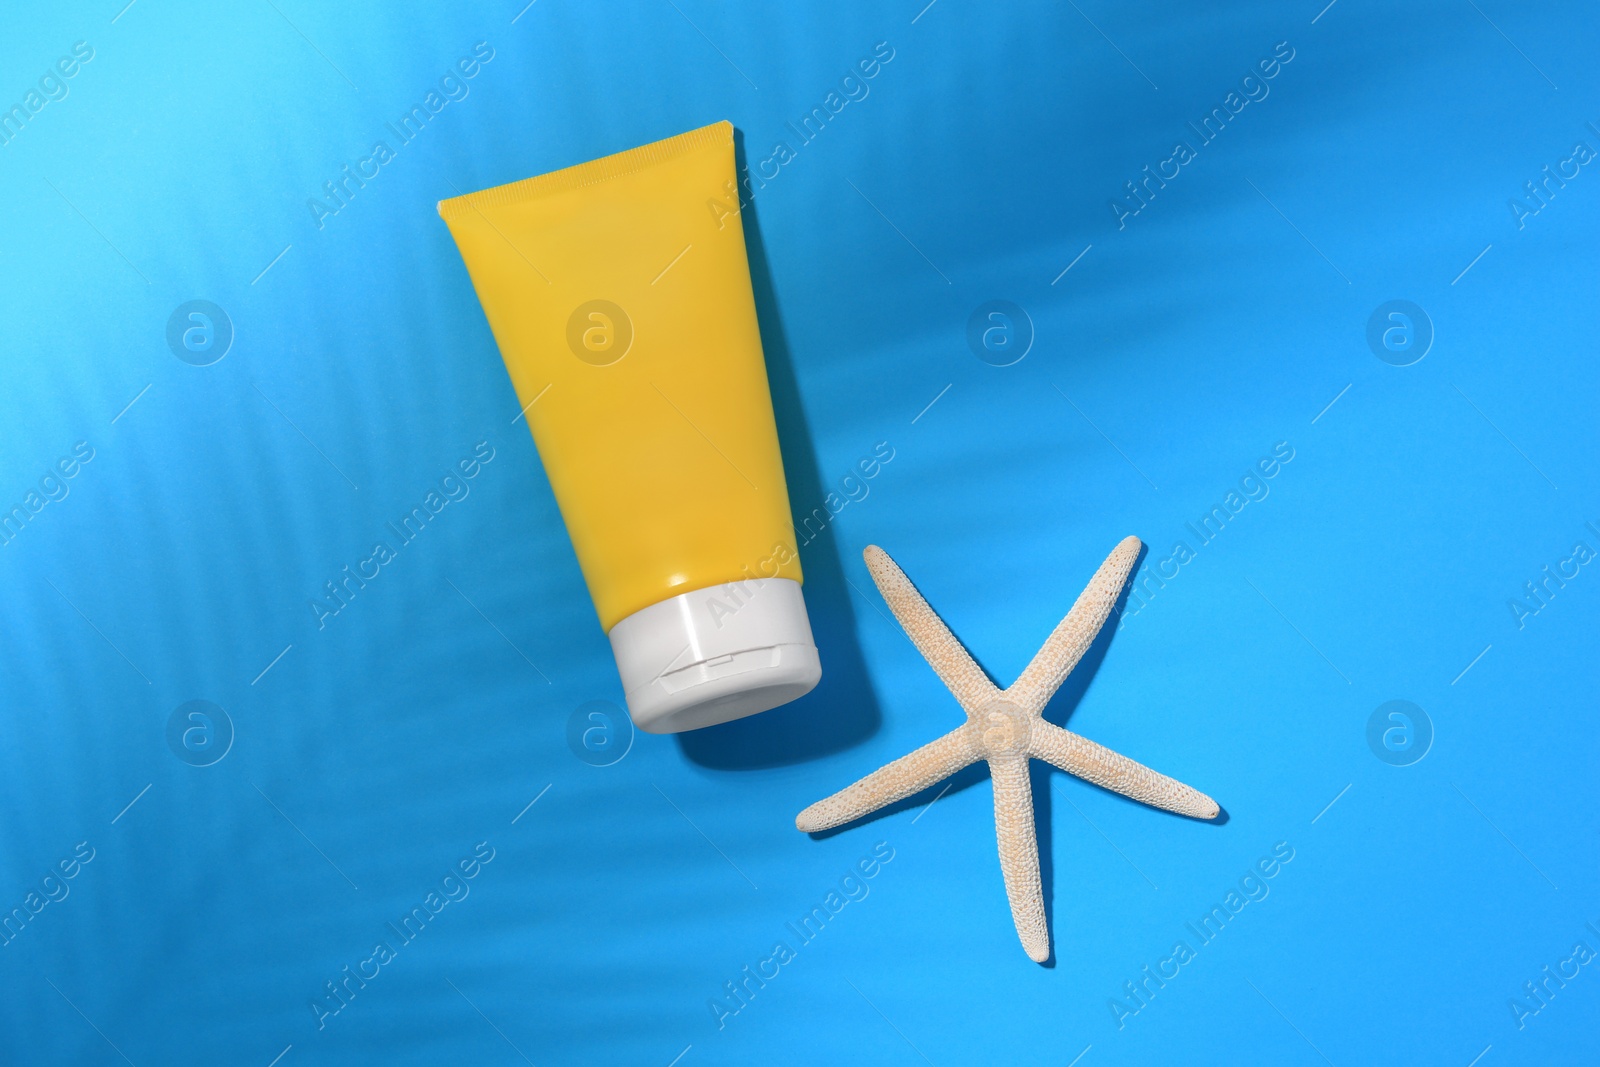 Photo of Sunscreen and starfish on light blue background, flat lay. Sun protection care